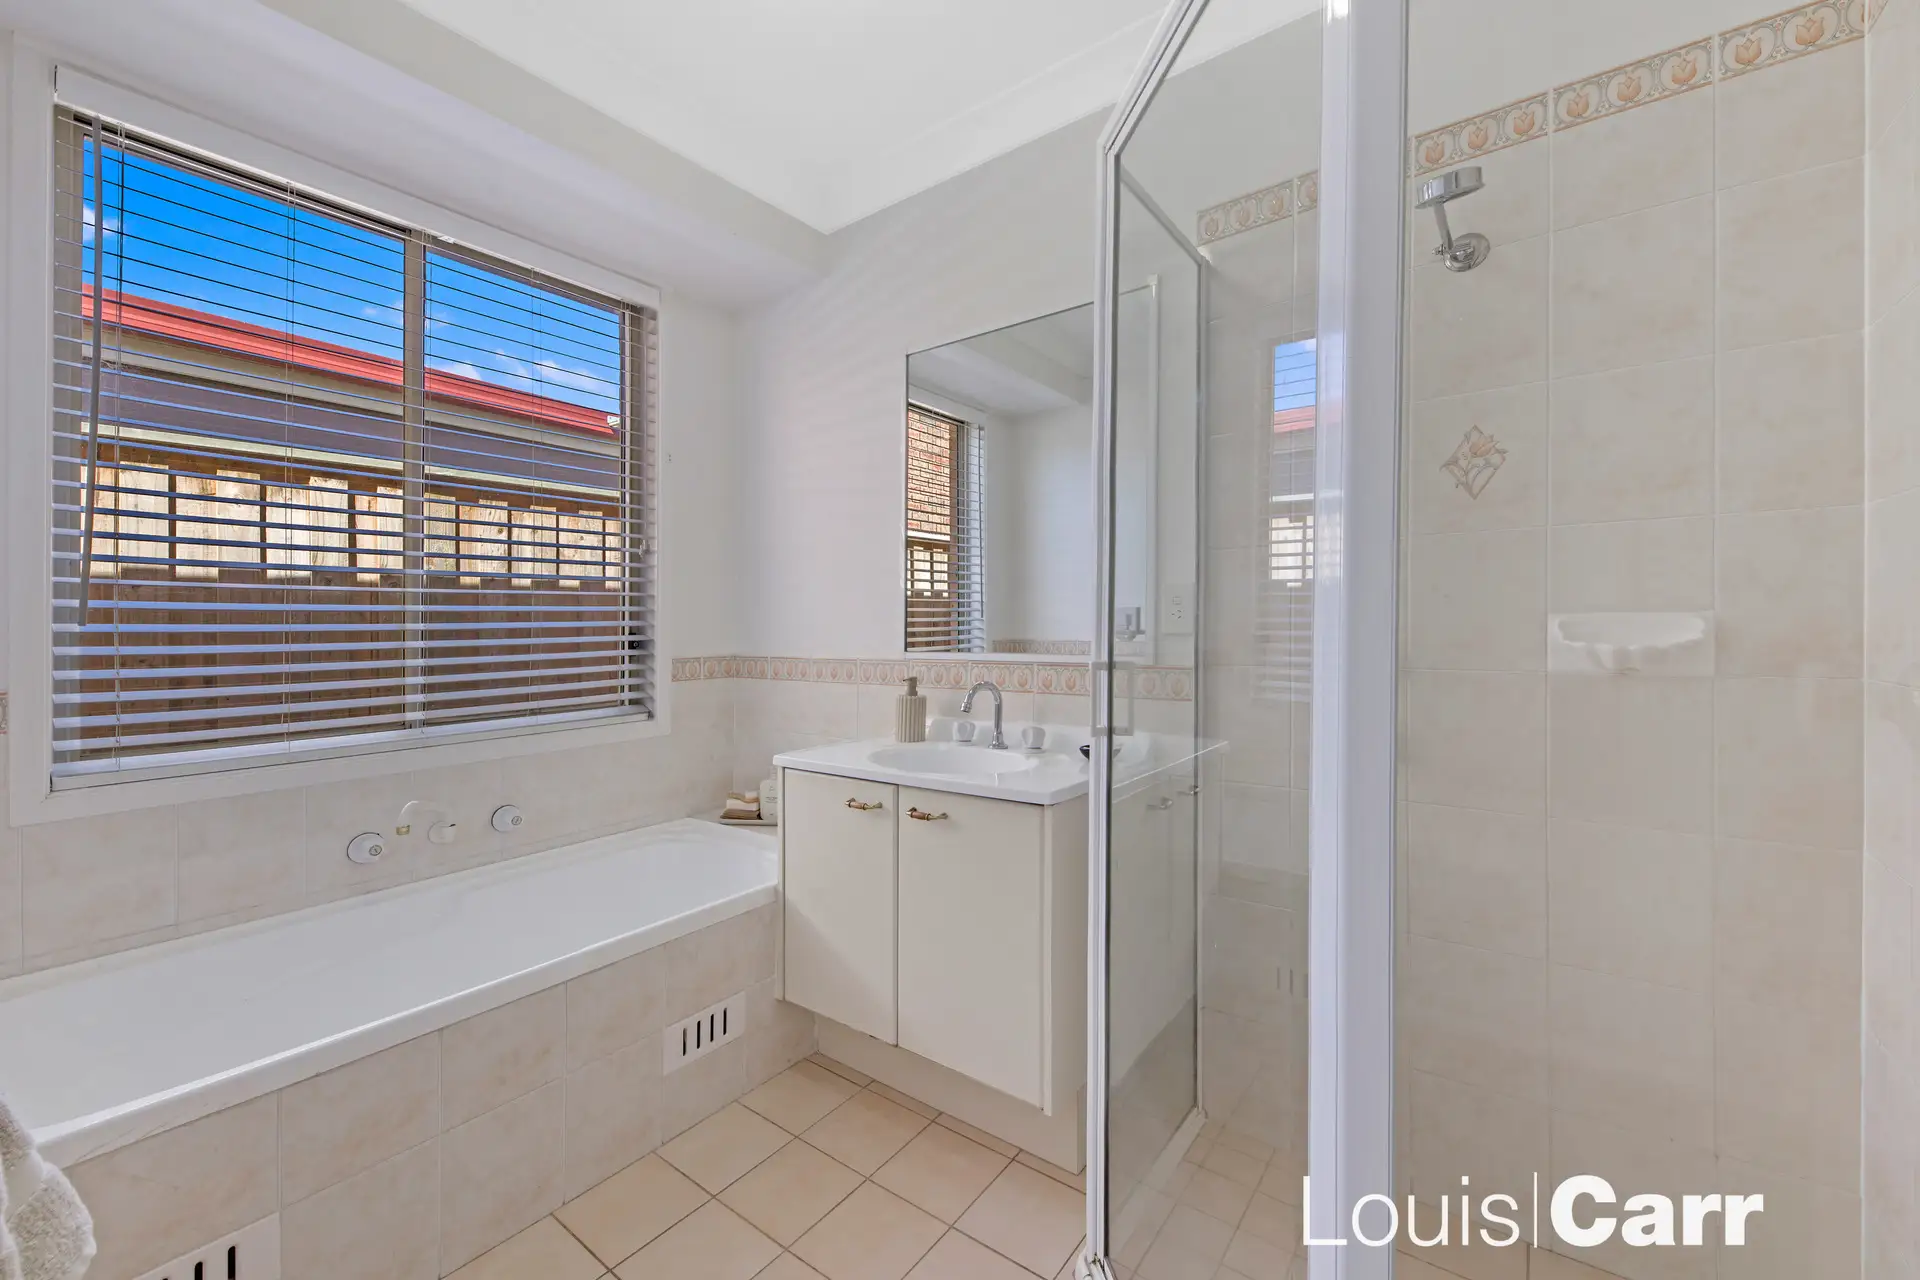 Photo #11: 30 Macquarie Avenue, Kellyville - Sold by Louis Carr Real Estate